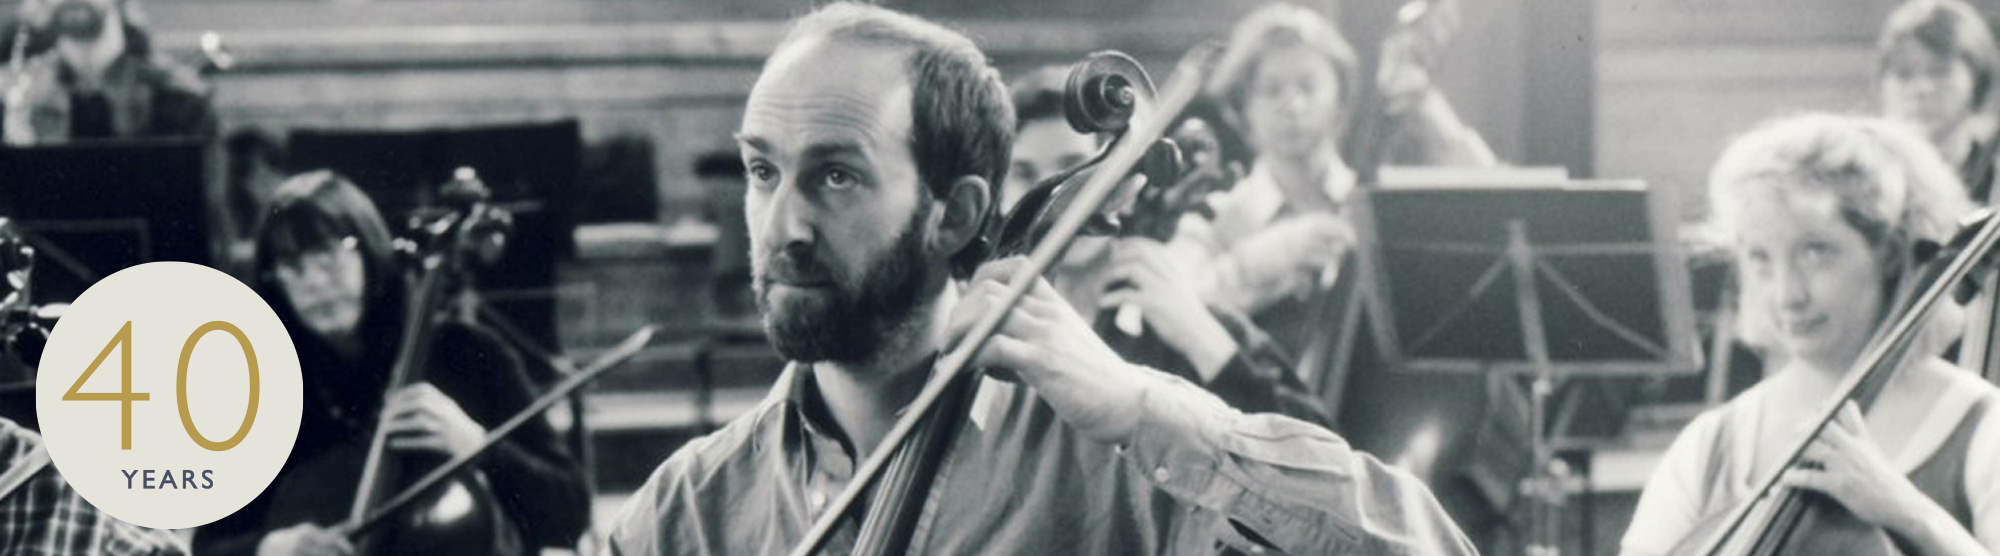 historical image of cellist in orchestra